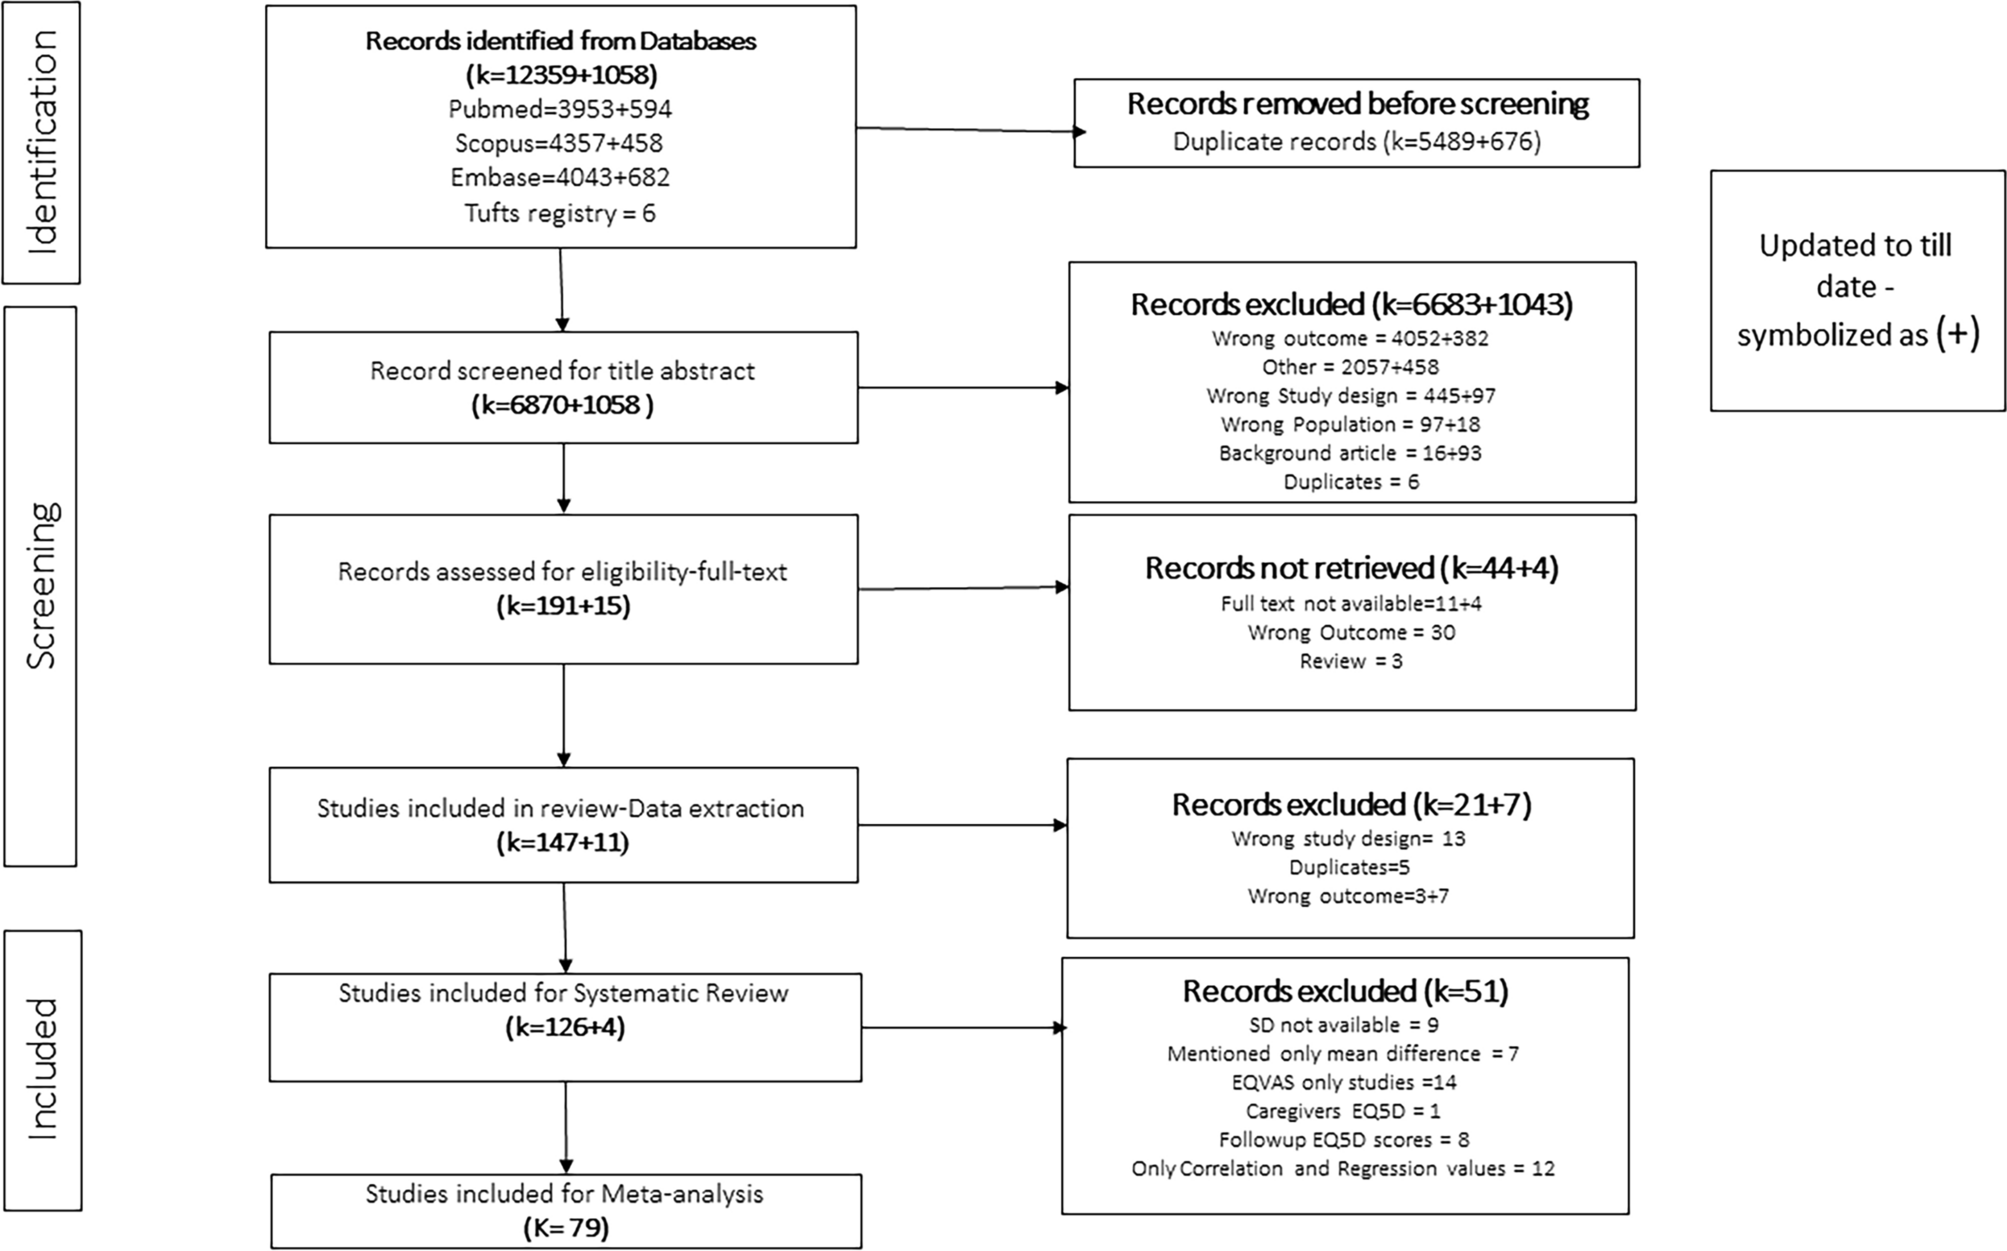 Health-related quality of life in Parkinson’s disease: systematic review and meta-analysis of EuroQol (EQ-5D) utility scores